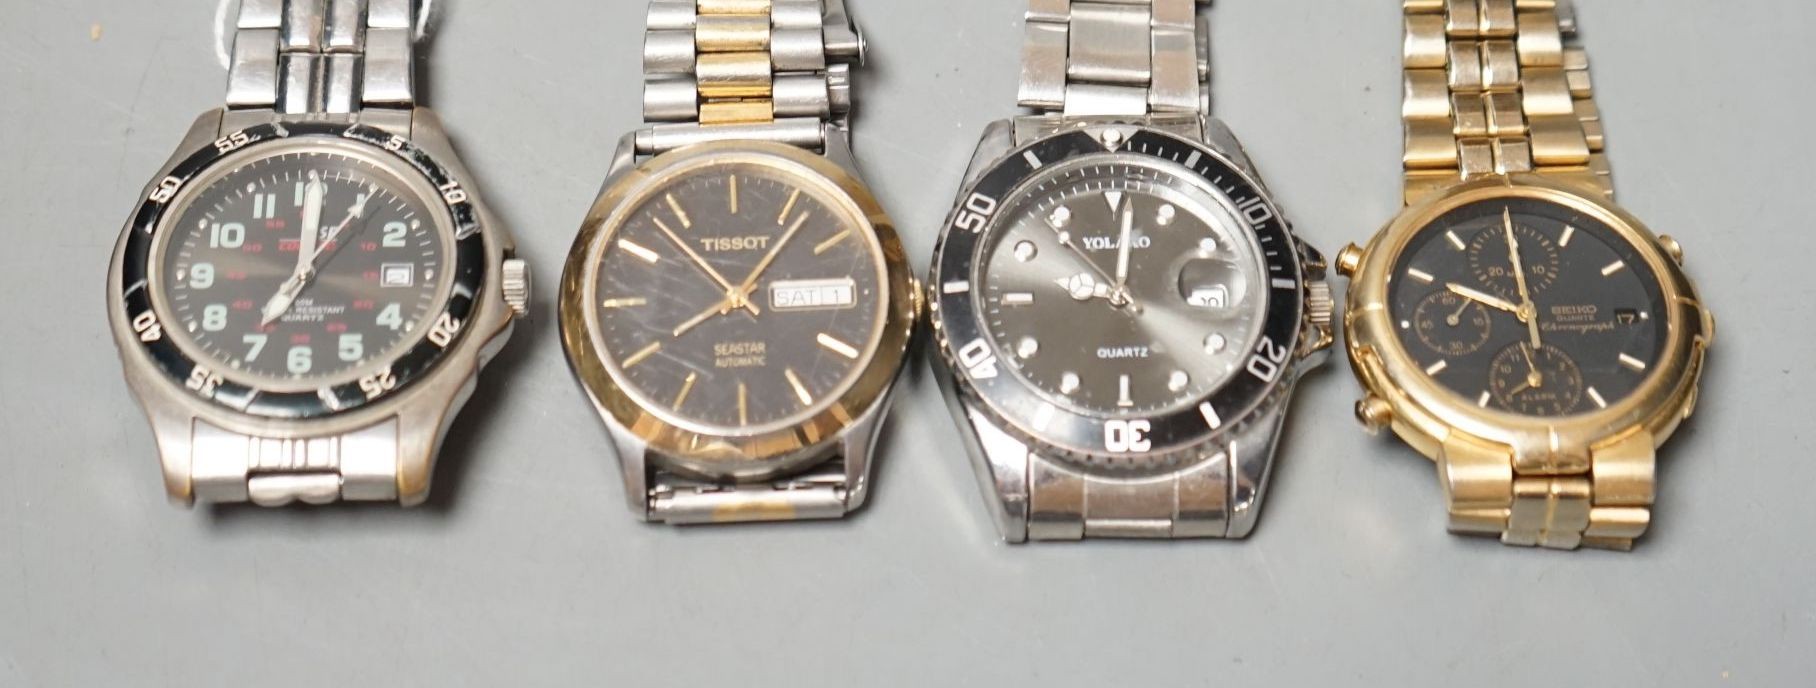 Four assorted gentleman's modern wrist watches, including Seiko and Tissot.